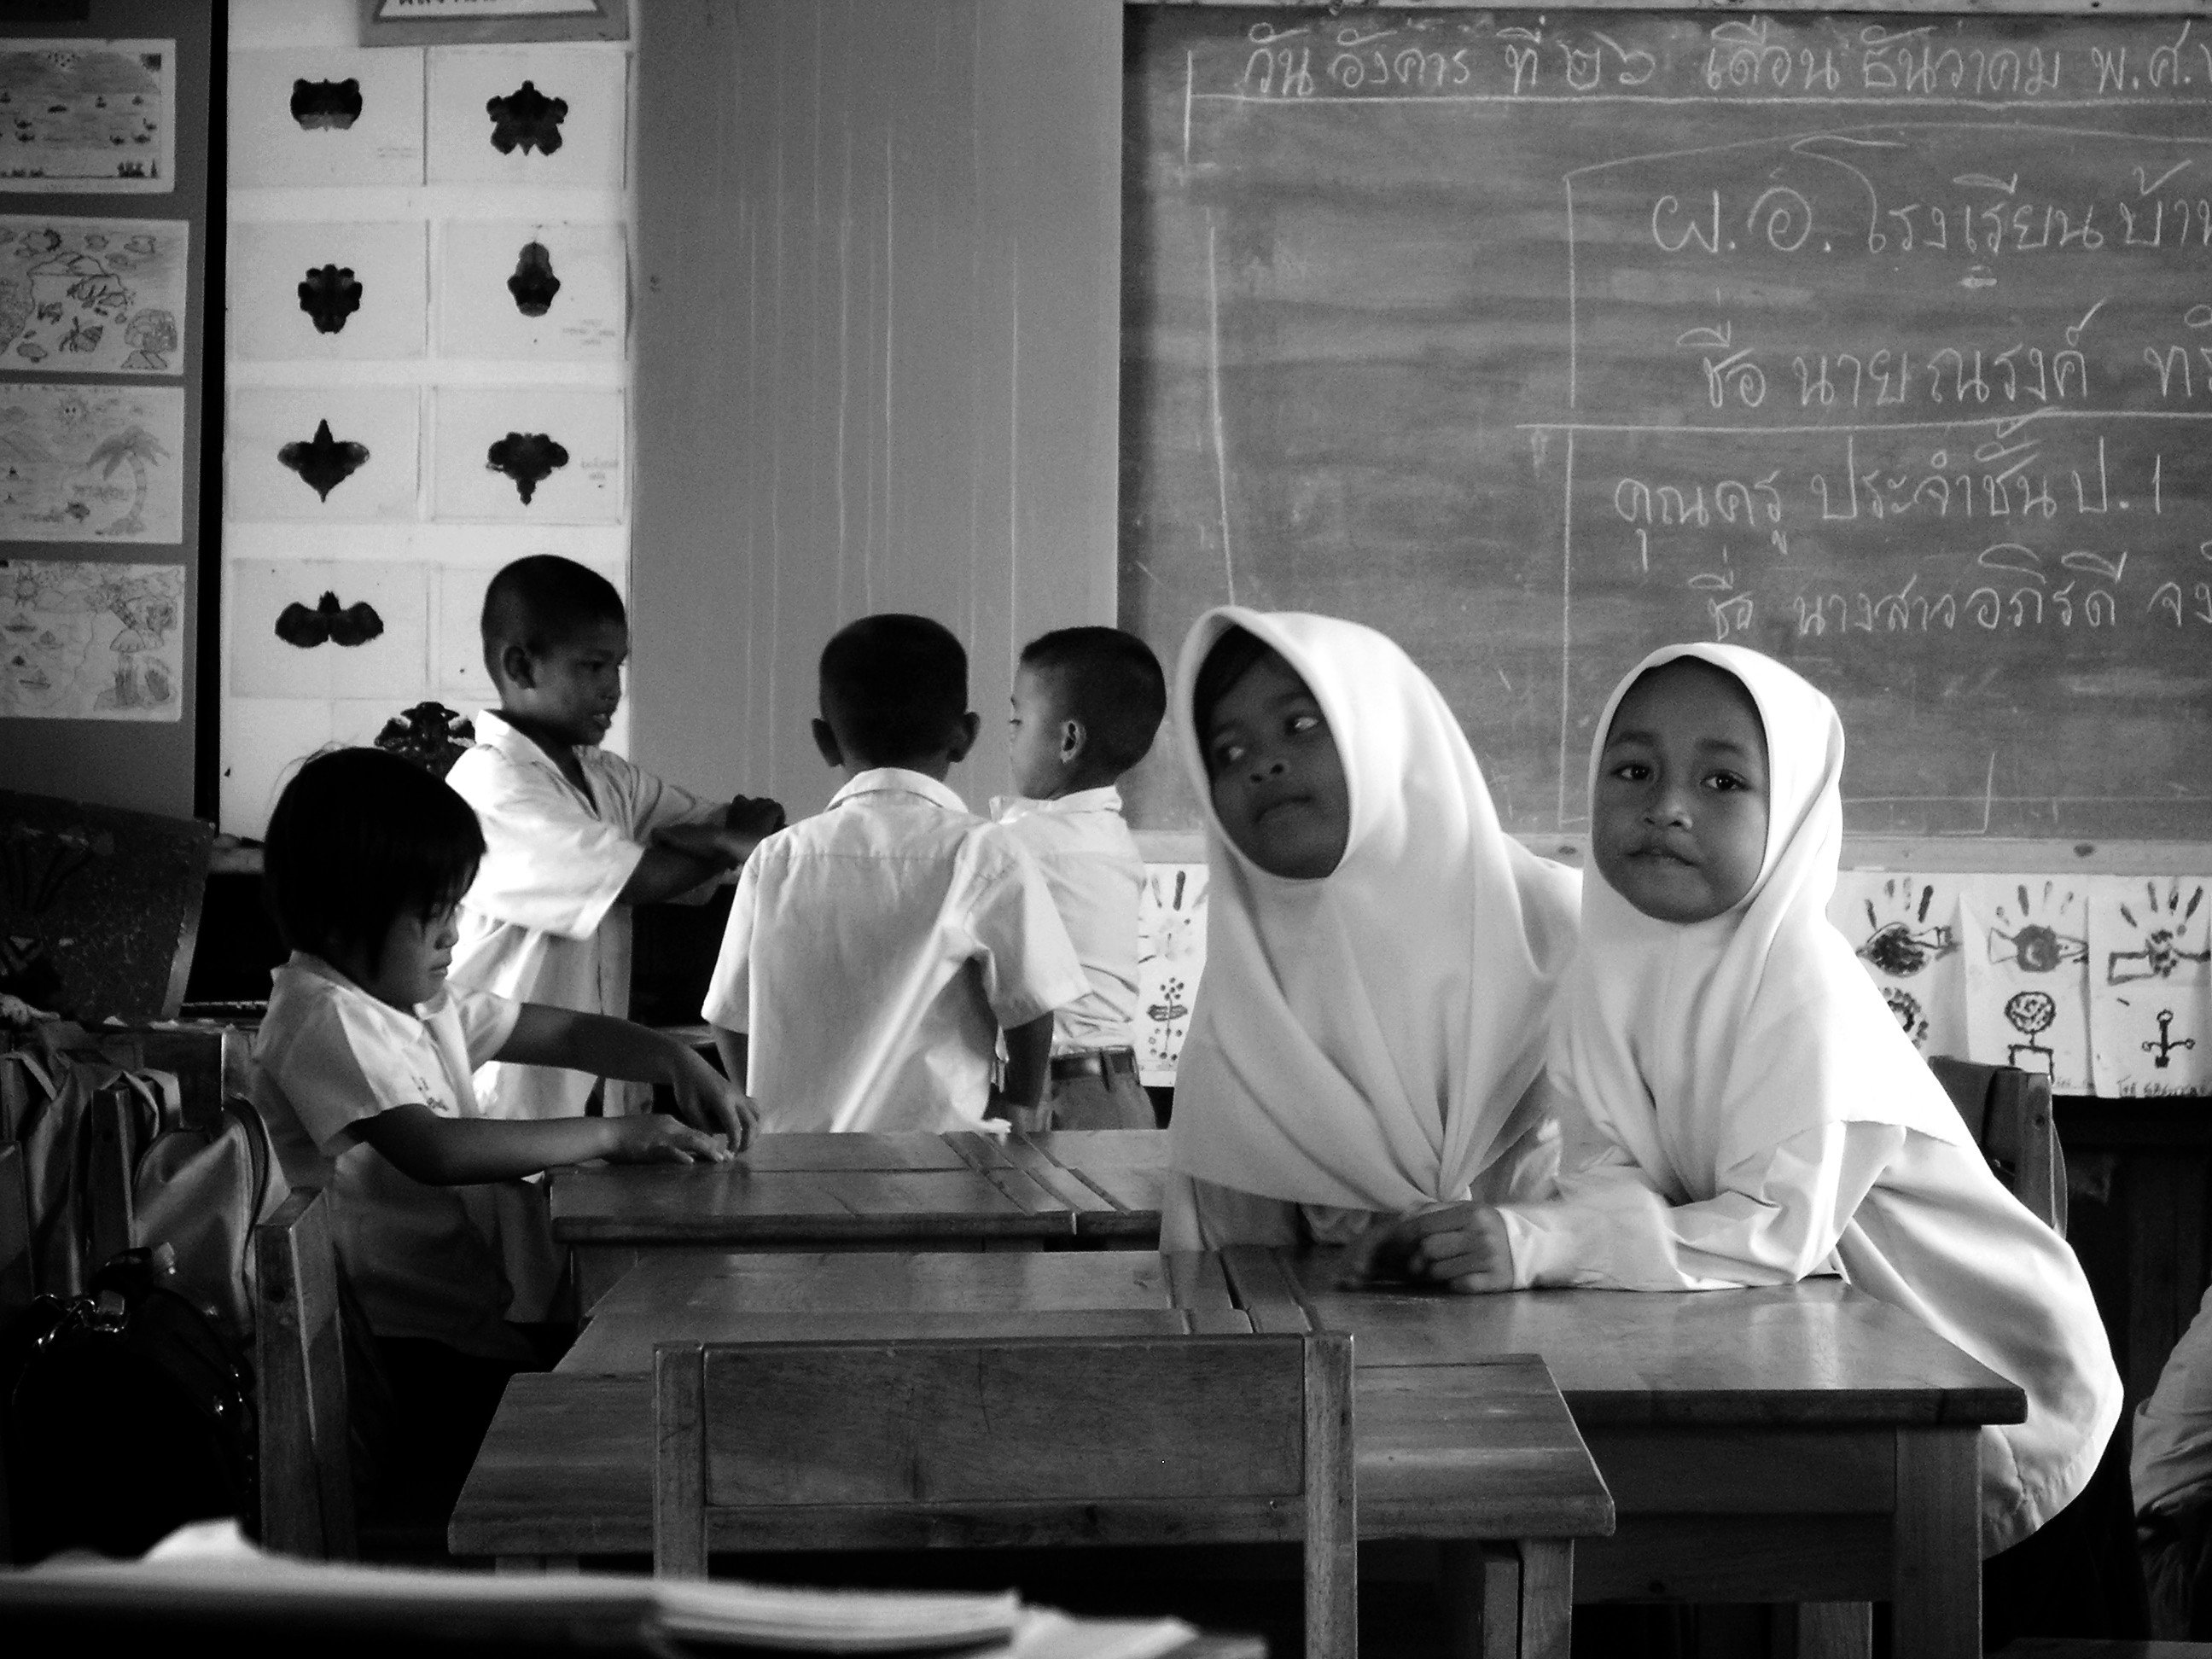 Let Girls Learn Helps Young Women All Over the World Earn an Education